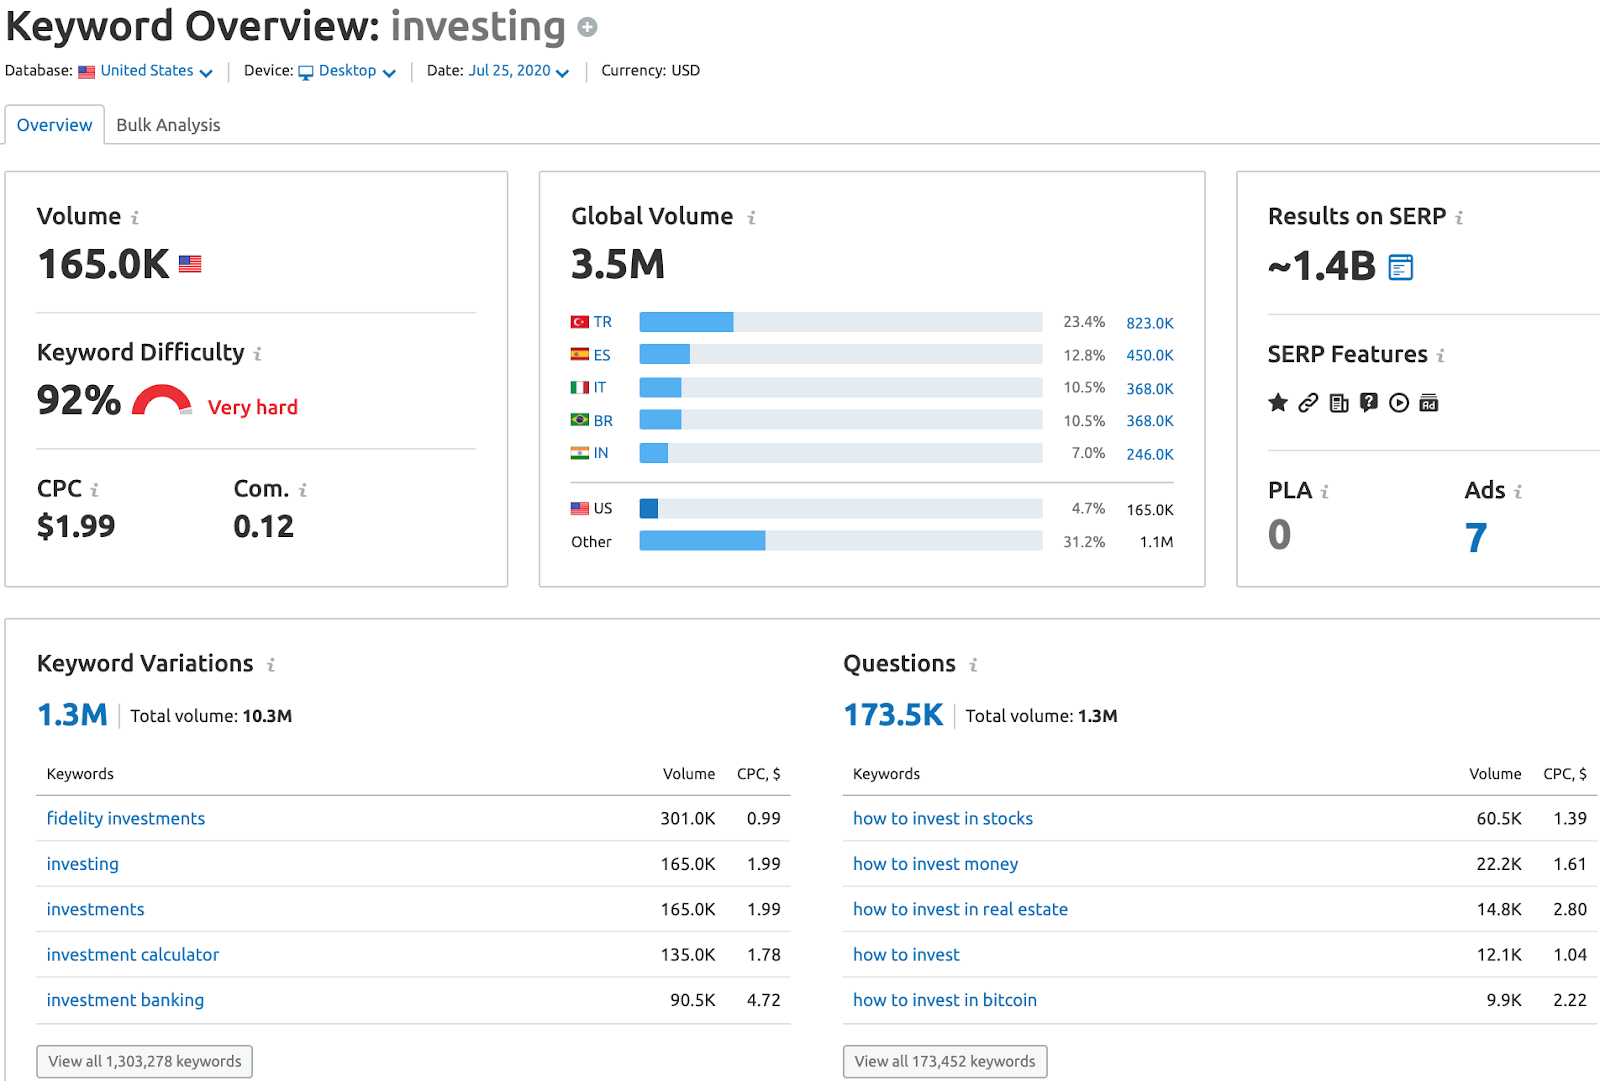 Investing Keyword Overview